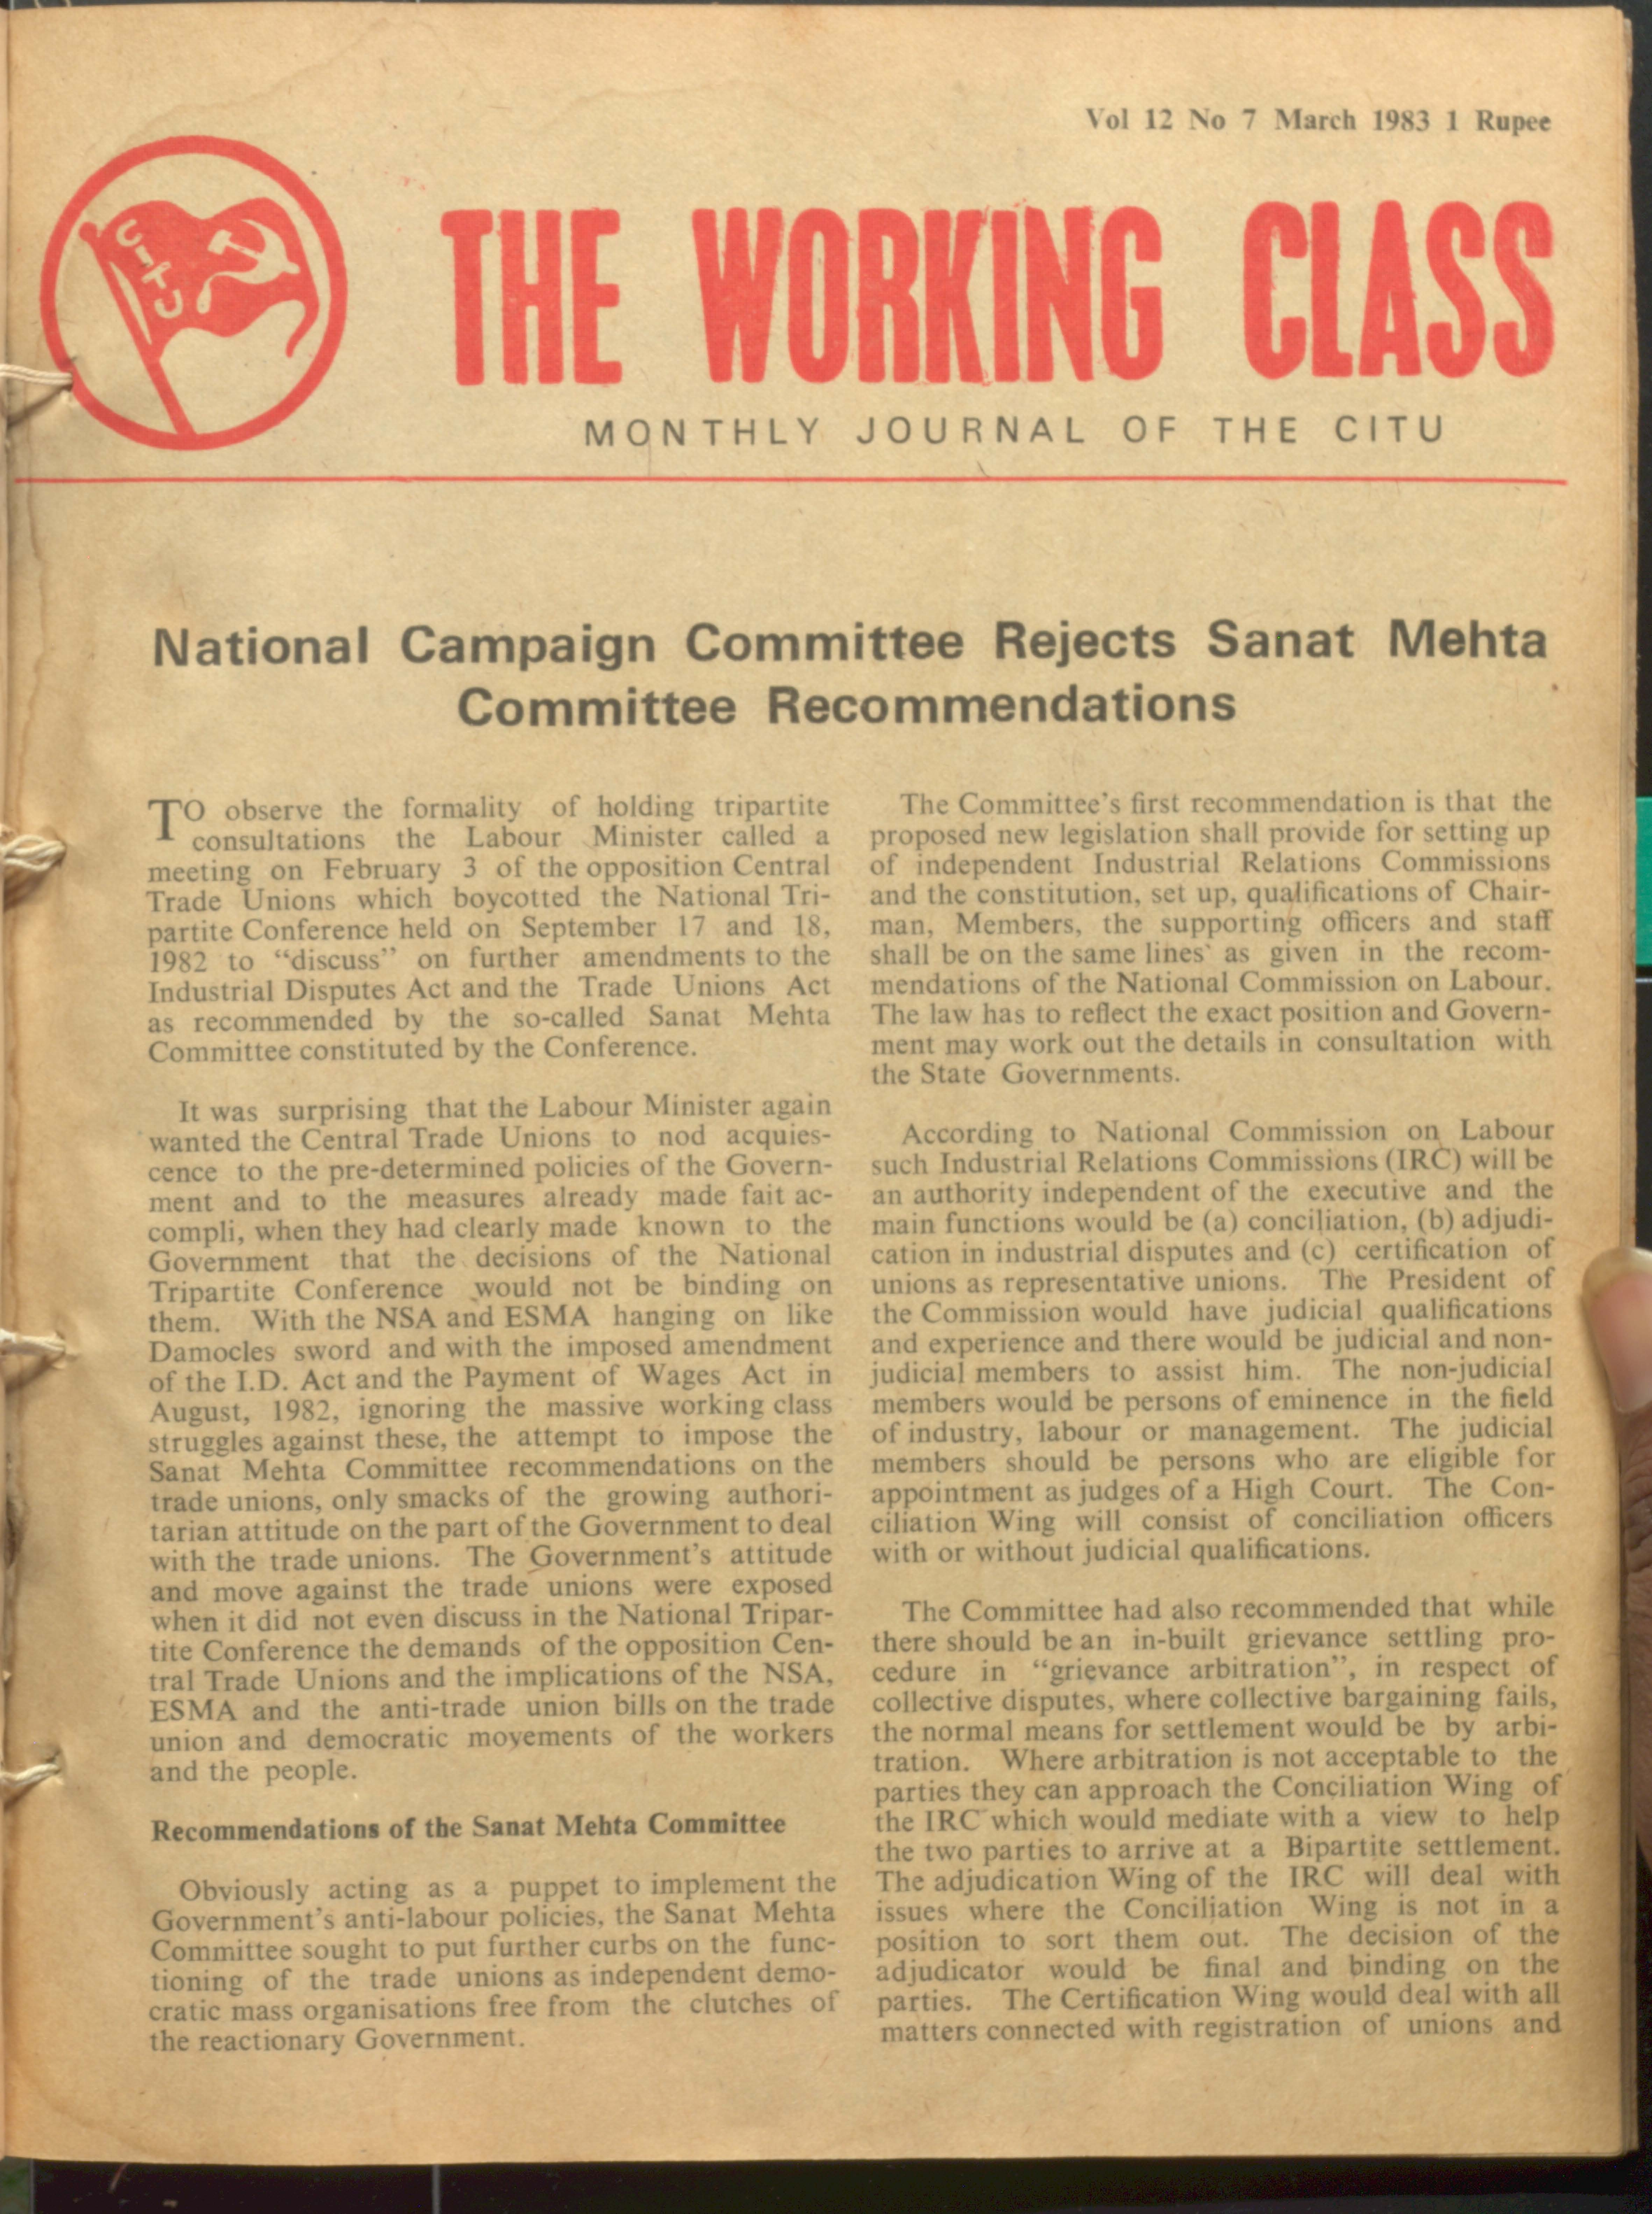 The Working Class Monthly Journal Of The CITU  March 1983, Valume - 12